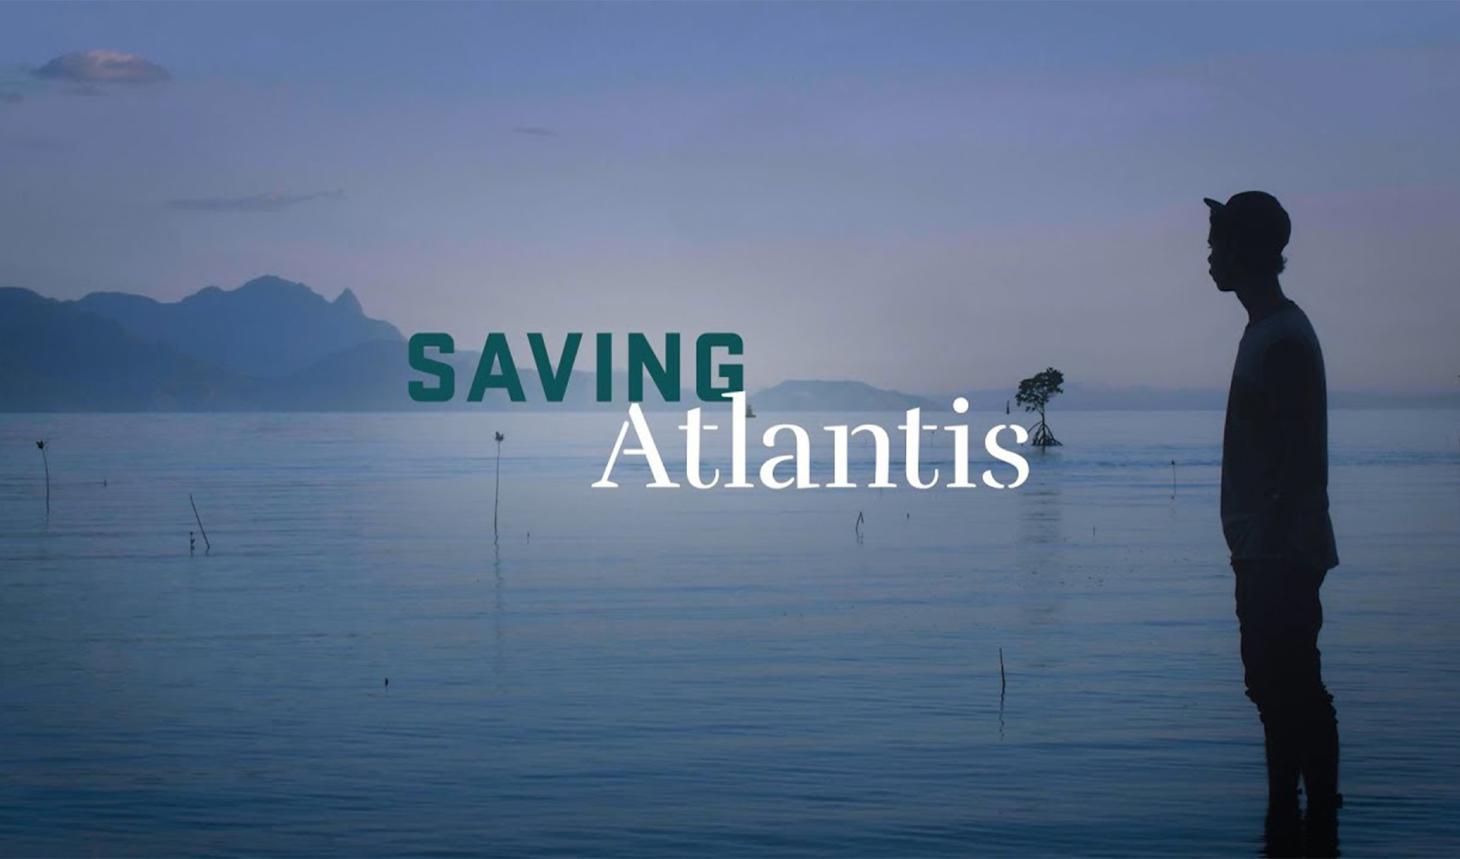 A silhouette of a person standing in a pond, with "Saving Atlantis" title in middle of photo.